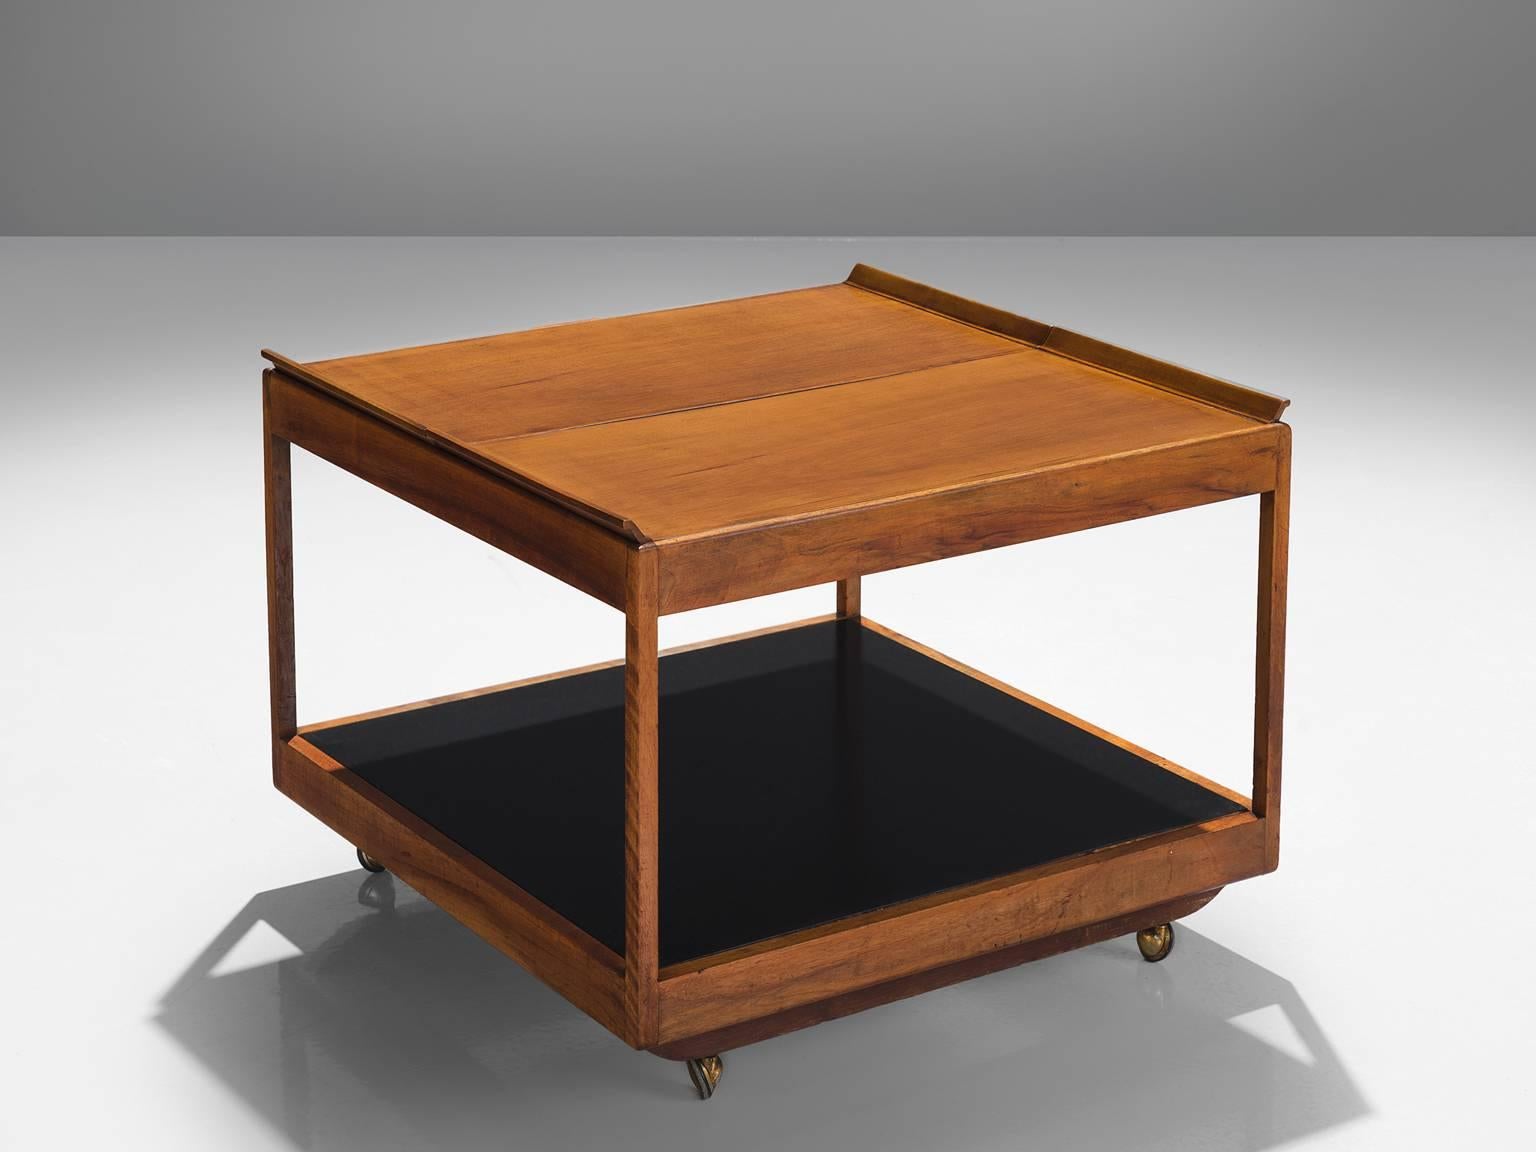 Martin Eisler for Forma, 1452 trolley table, stained beech, brassed metal, formica, circa 1960.

This small elegant coffee table and bar trolley is designed by Martin Eisler for Forma. All the separate elements of this table can be adjusted. The